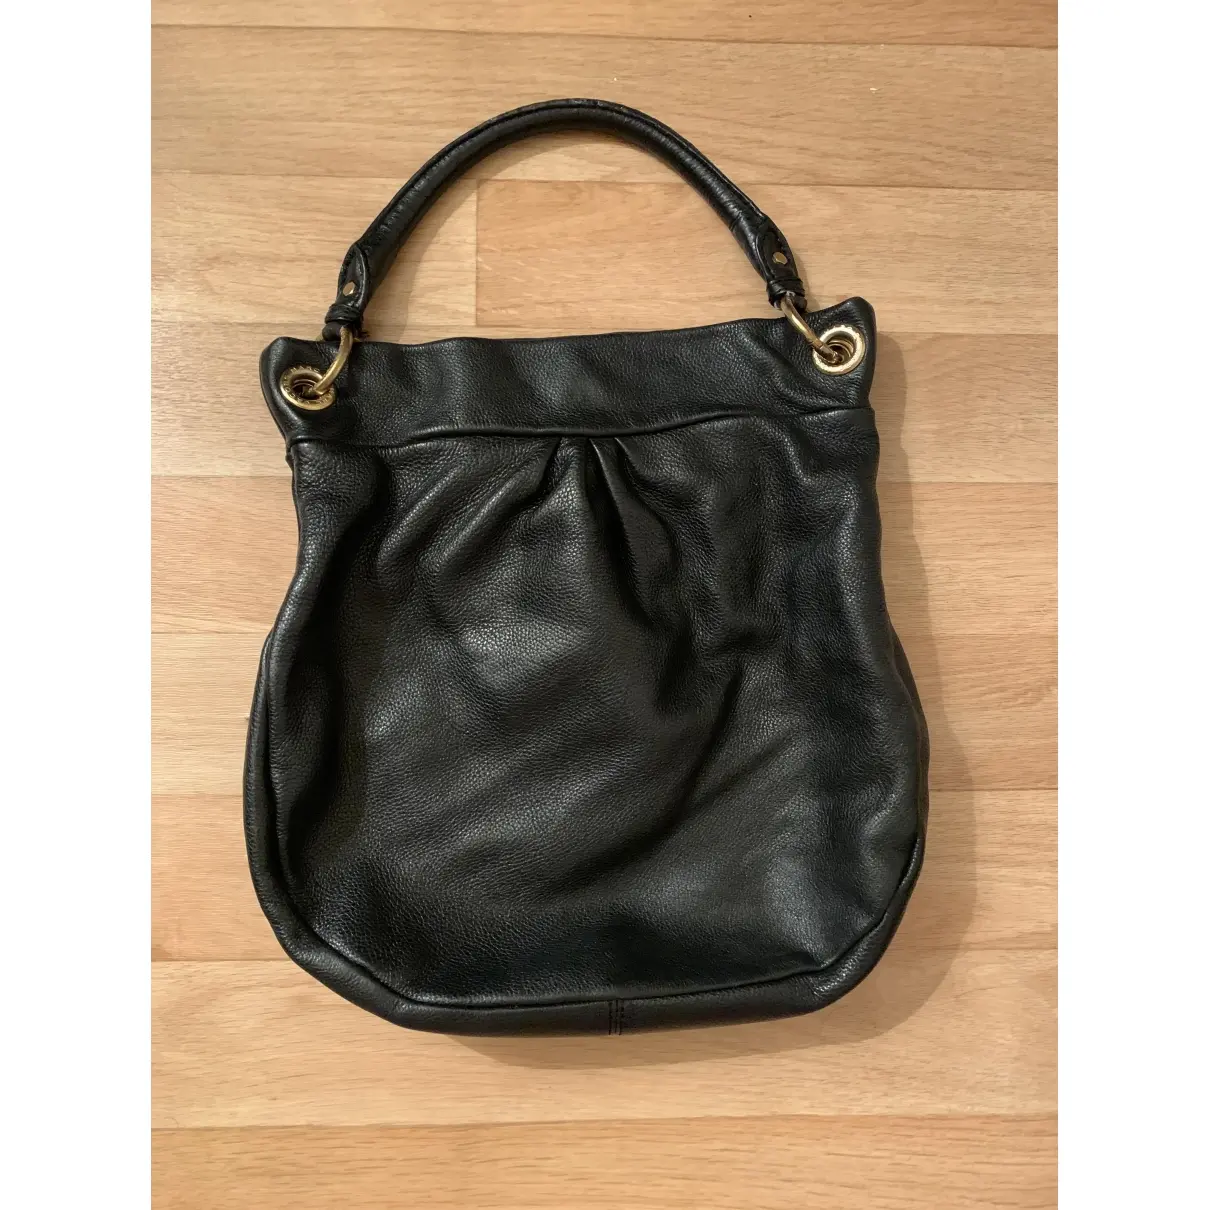 Marc by Marc Jacobs Too Hot to Handle leather handbag for sale